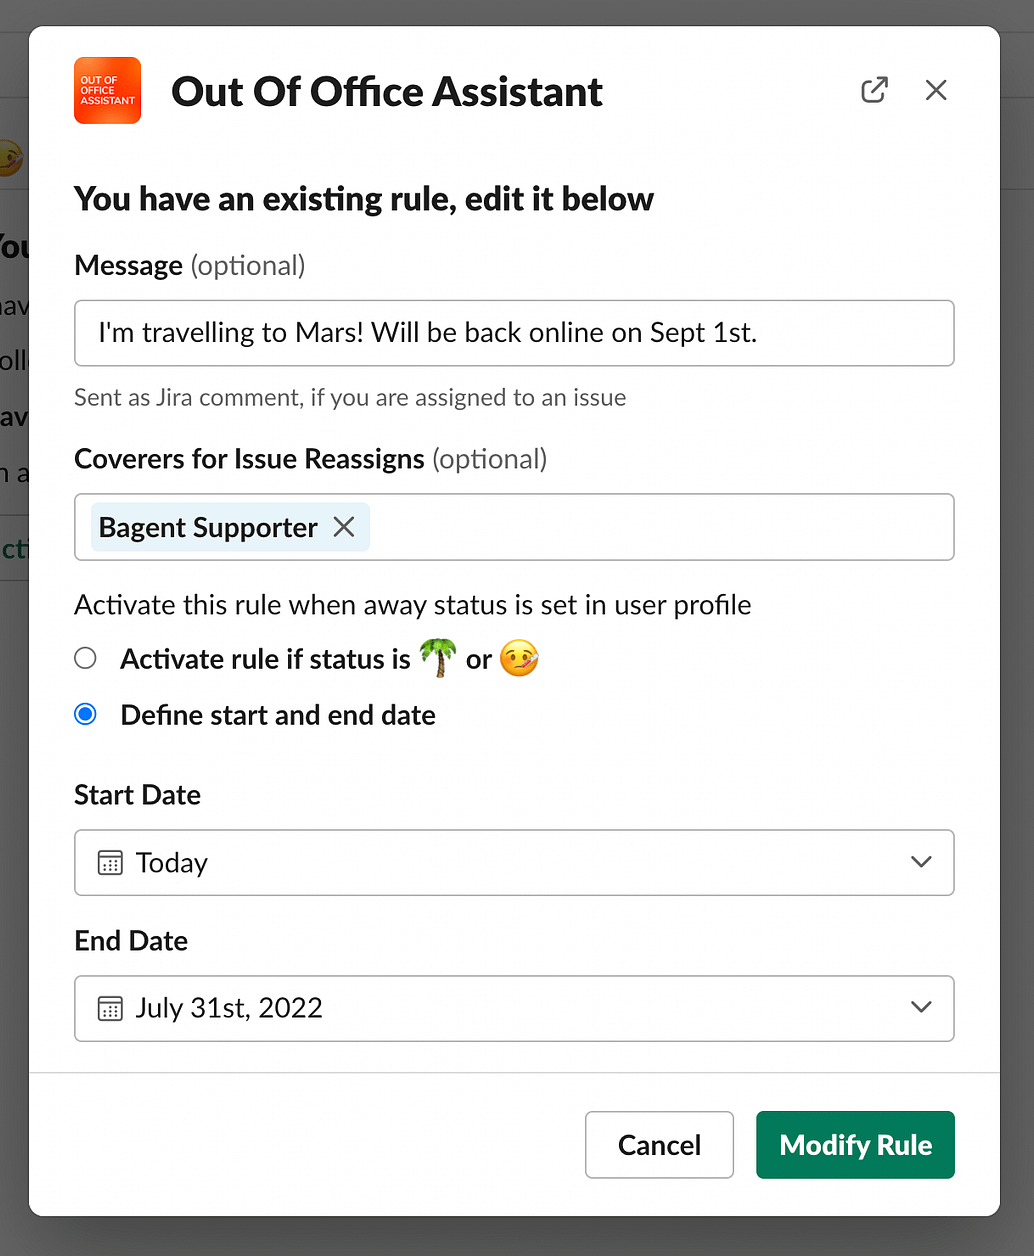 Slack form to send in new Out of Office rules when you're about to go on vacation